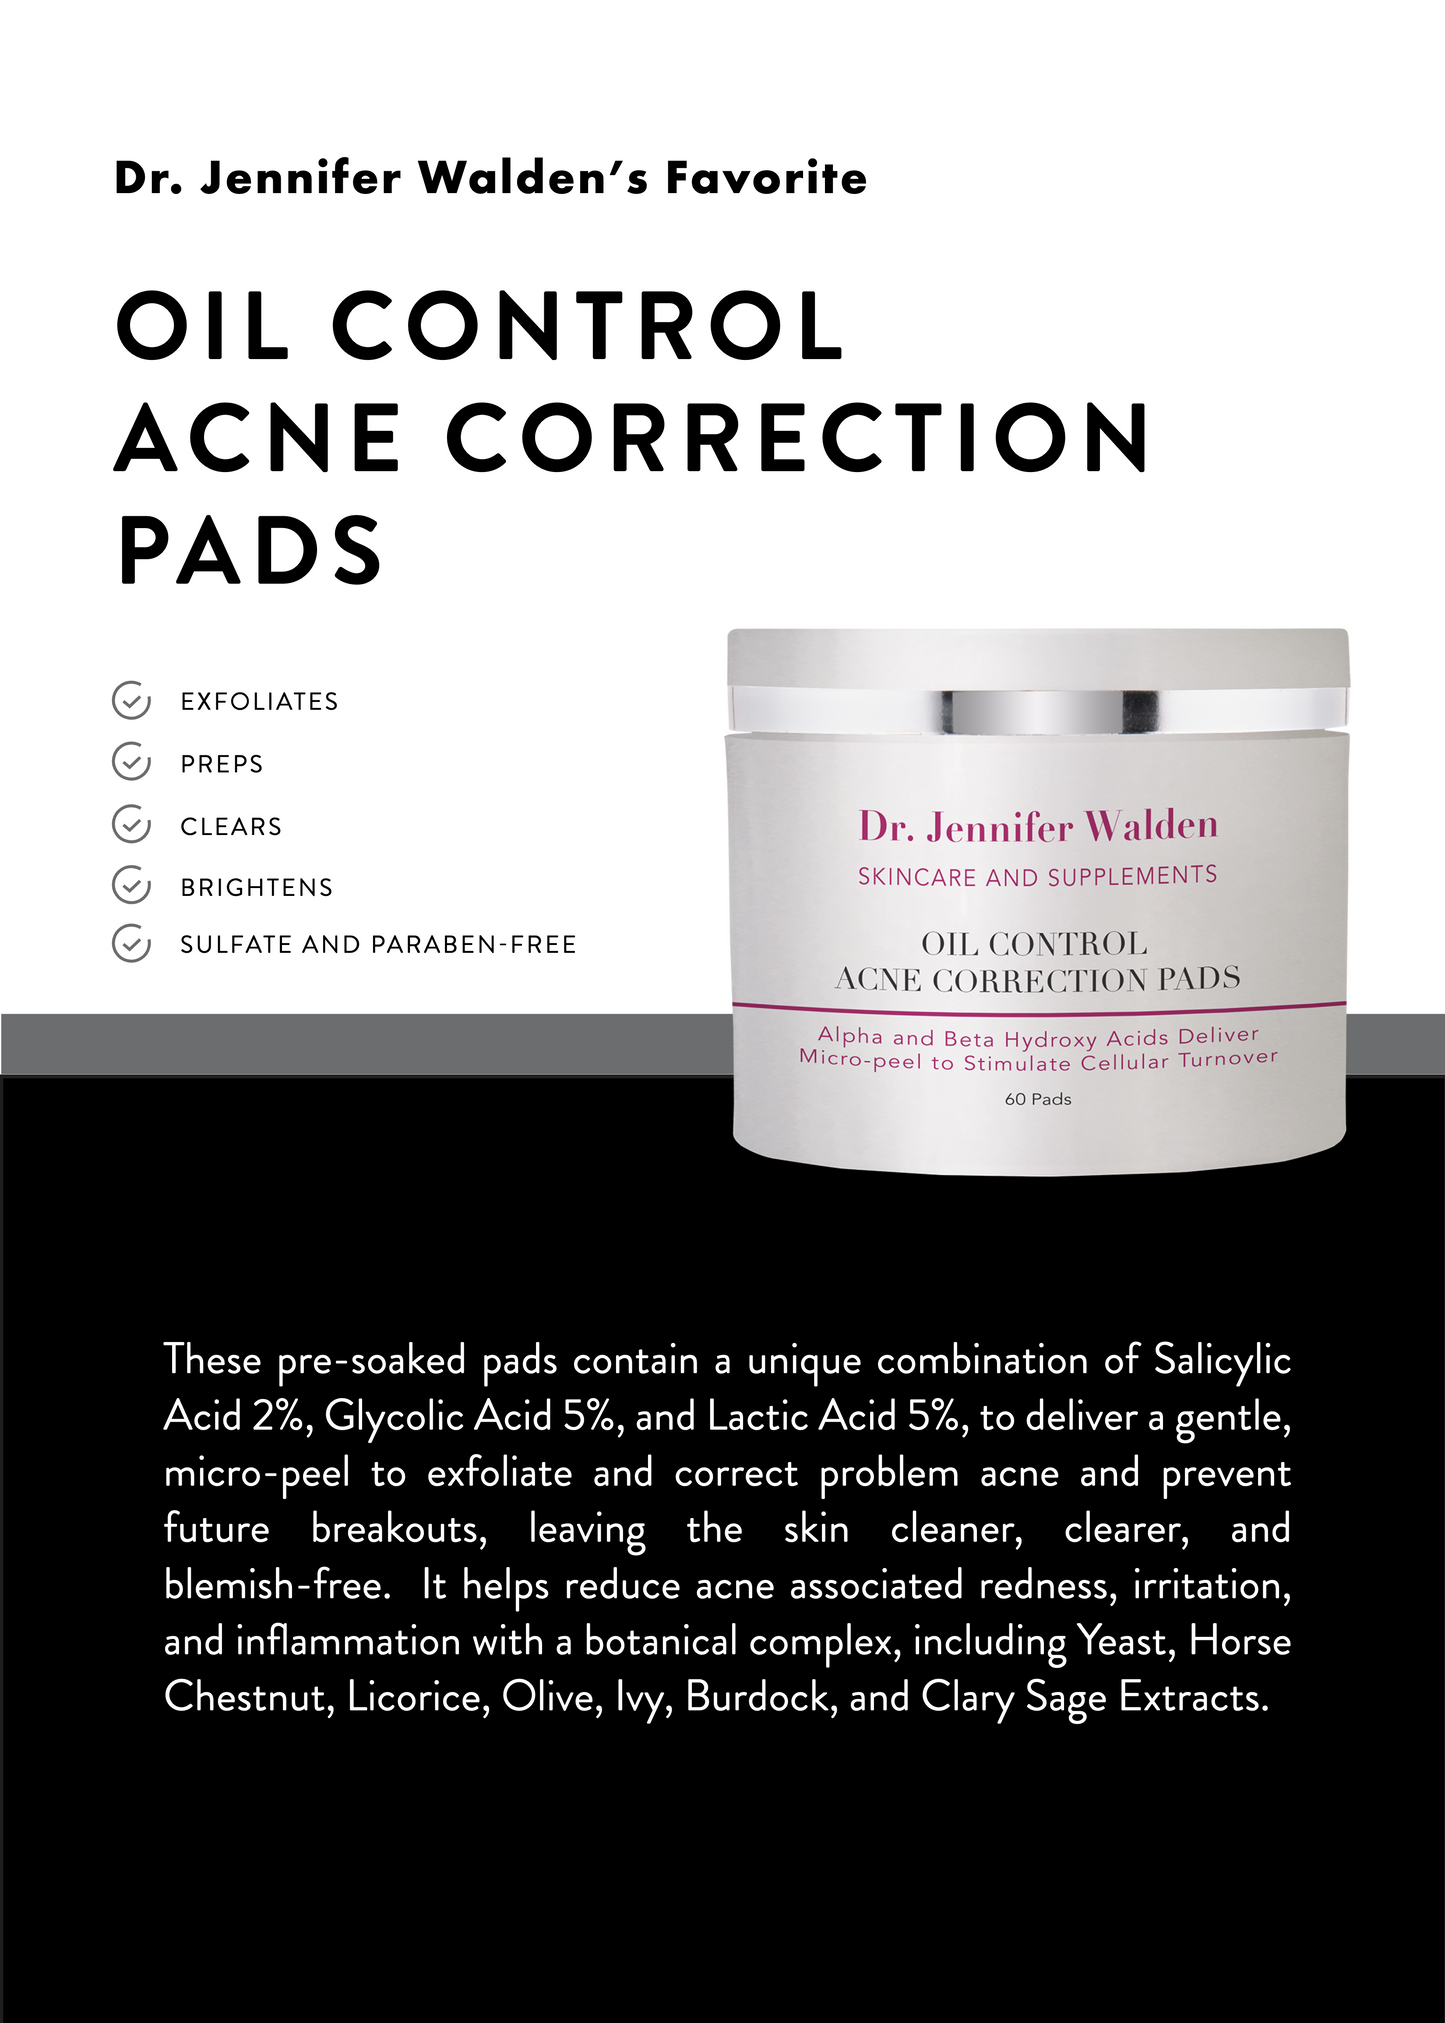 OIL CONTROL ACNE CORRECTION PADS-6